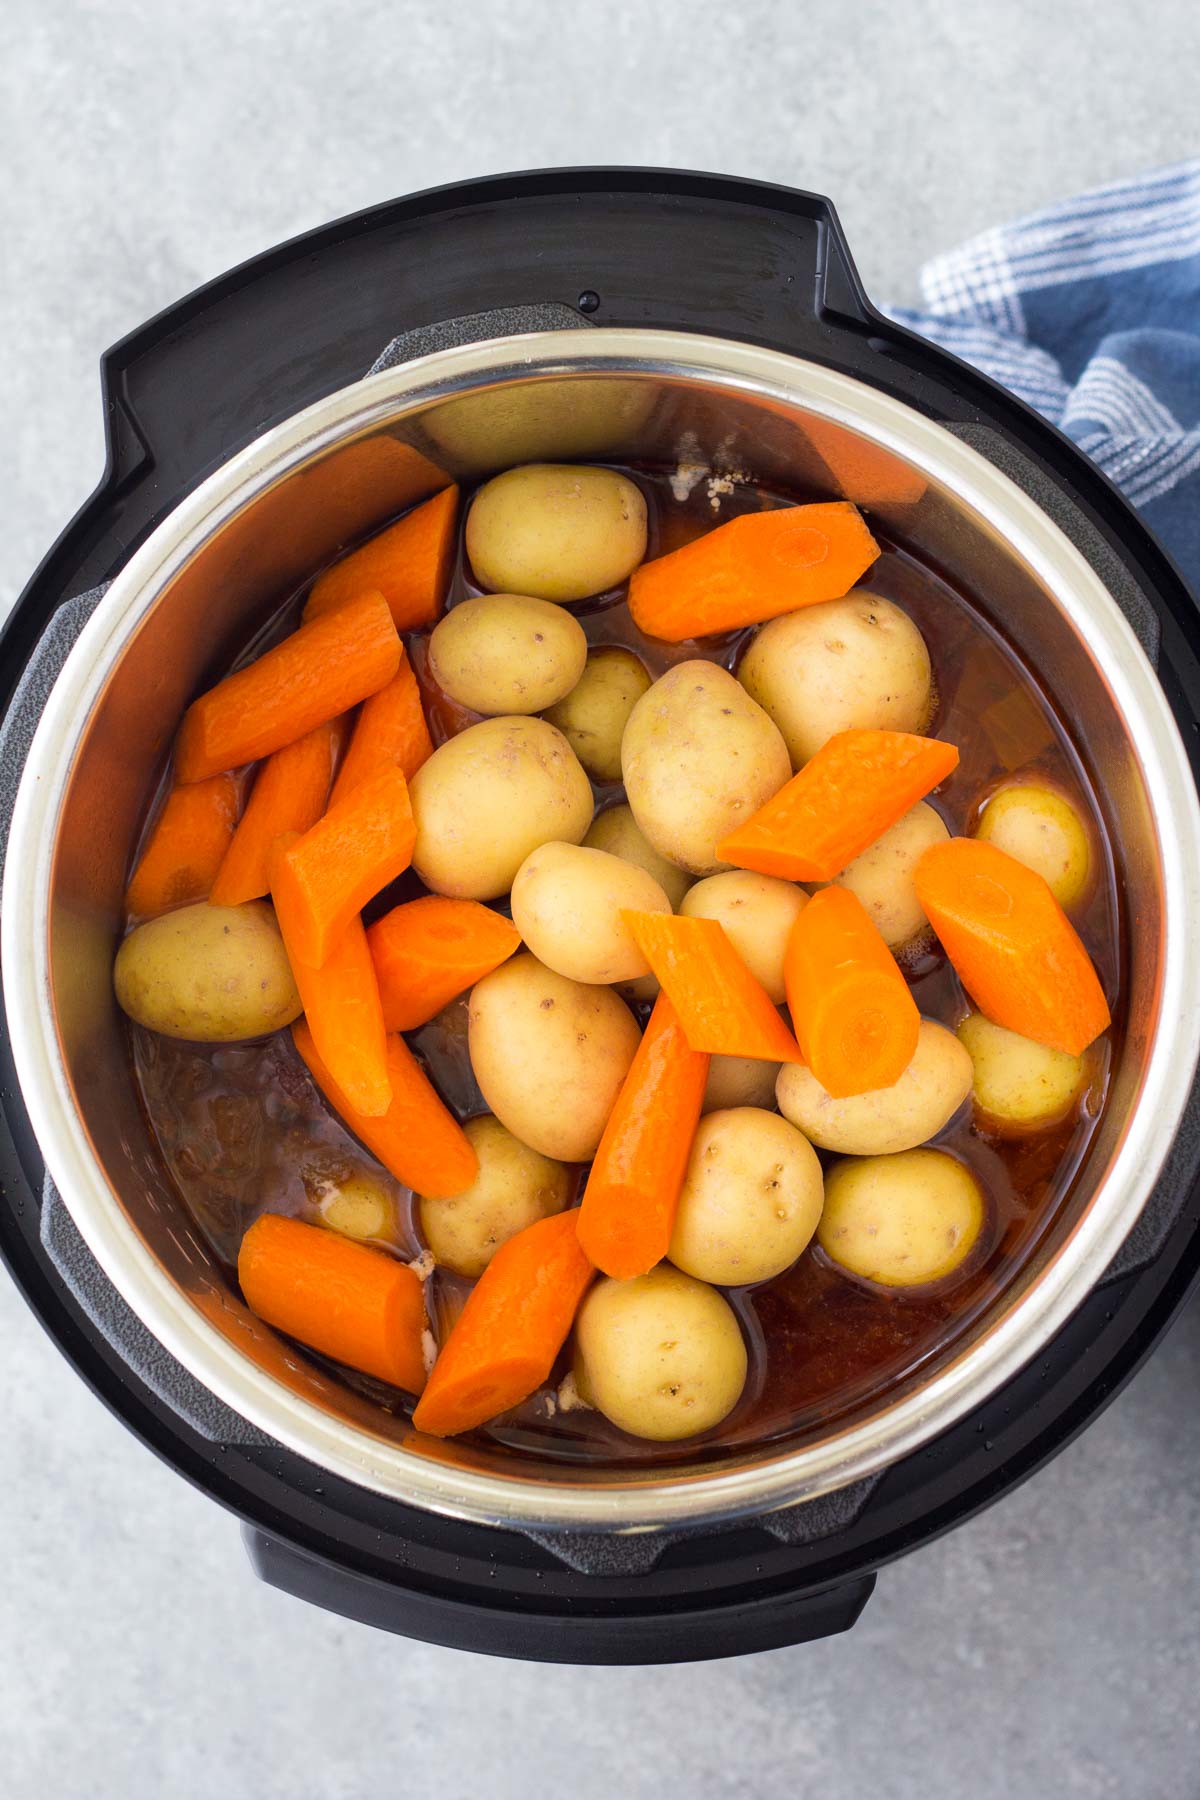 Baby potatoes and carrots added to instant pot.